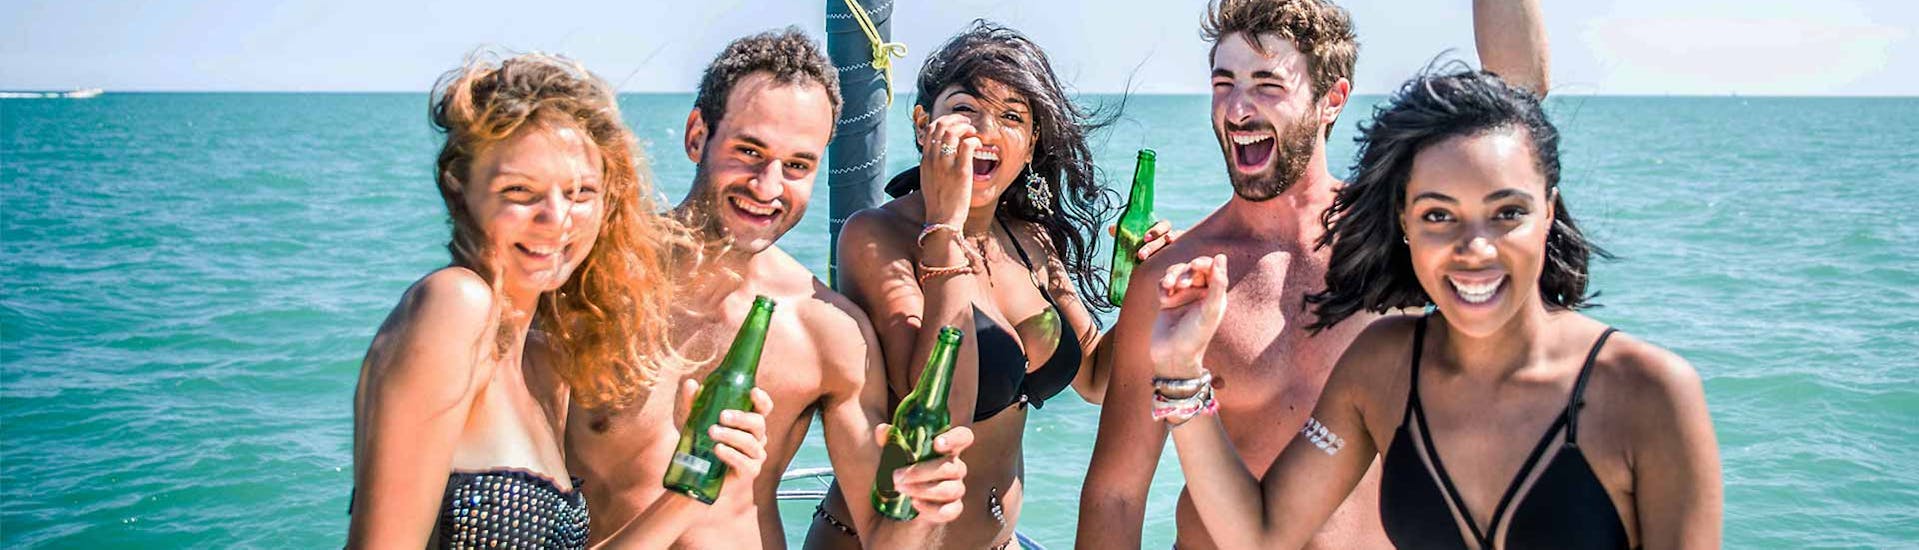 A group of participants drinking and having fun on a party boat in Mykonos during an activity with Mykonos Boat Club.